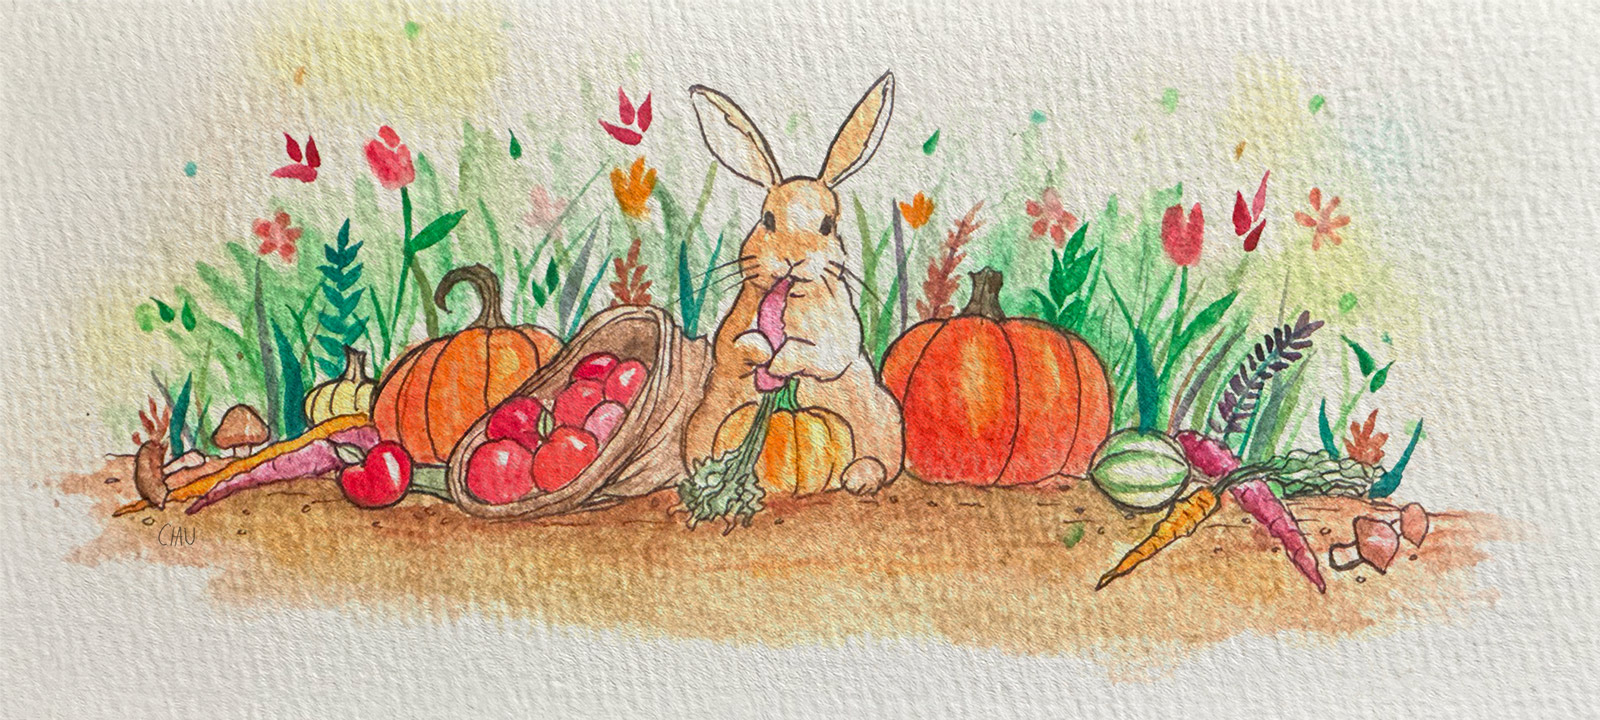 Watercolor painting of a serene autumn scene of a bunny eating a carrot in tall grass and flowers, surrounded by pumpkins, and other fall harvest vegetables. A small cornucopia is to the bunny's left side filled with fresh red apples.